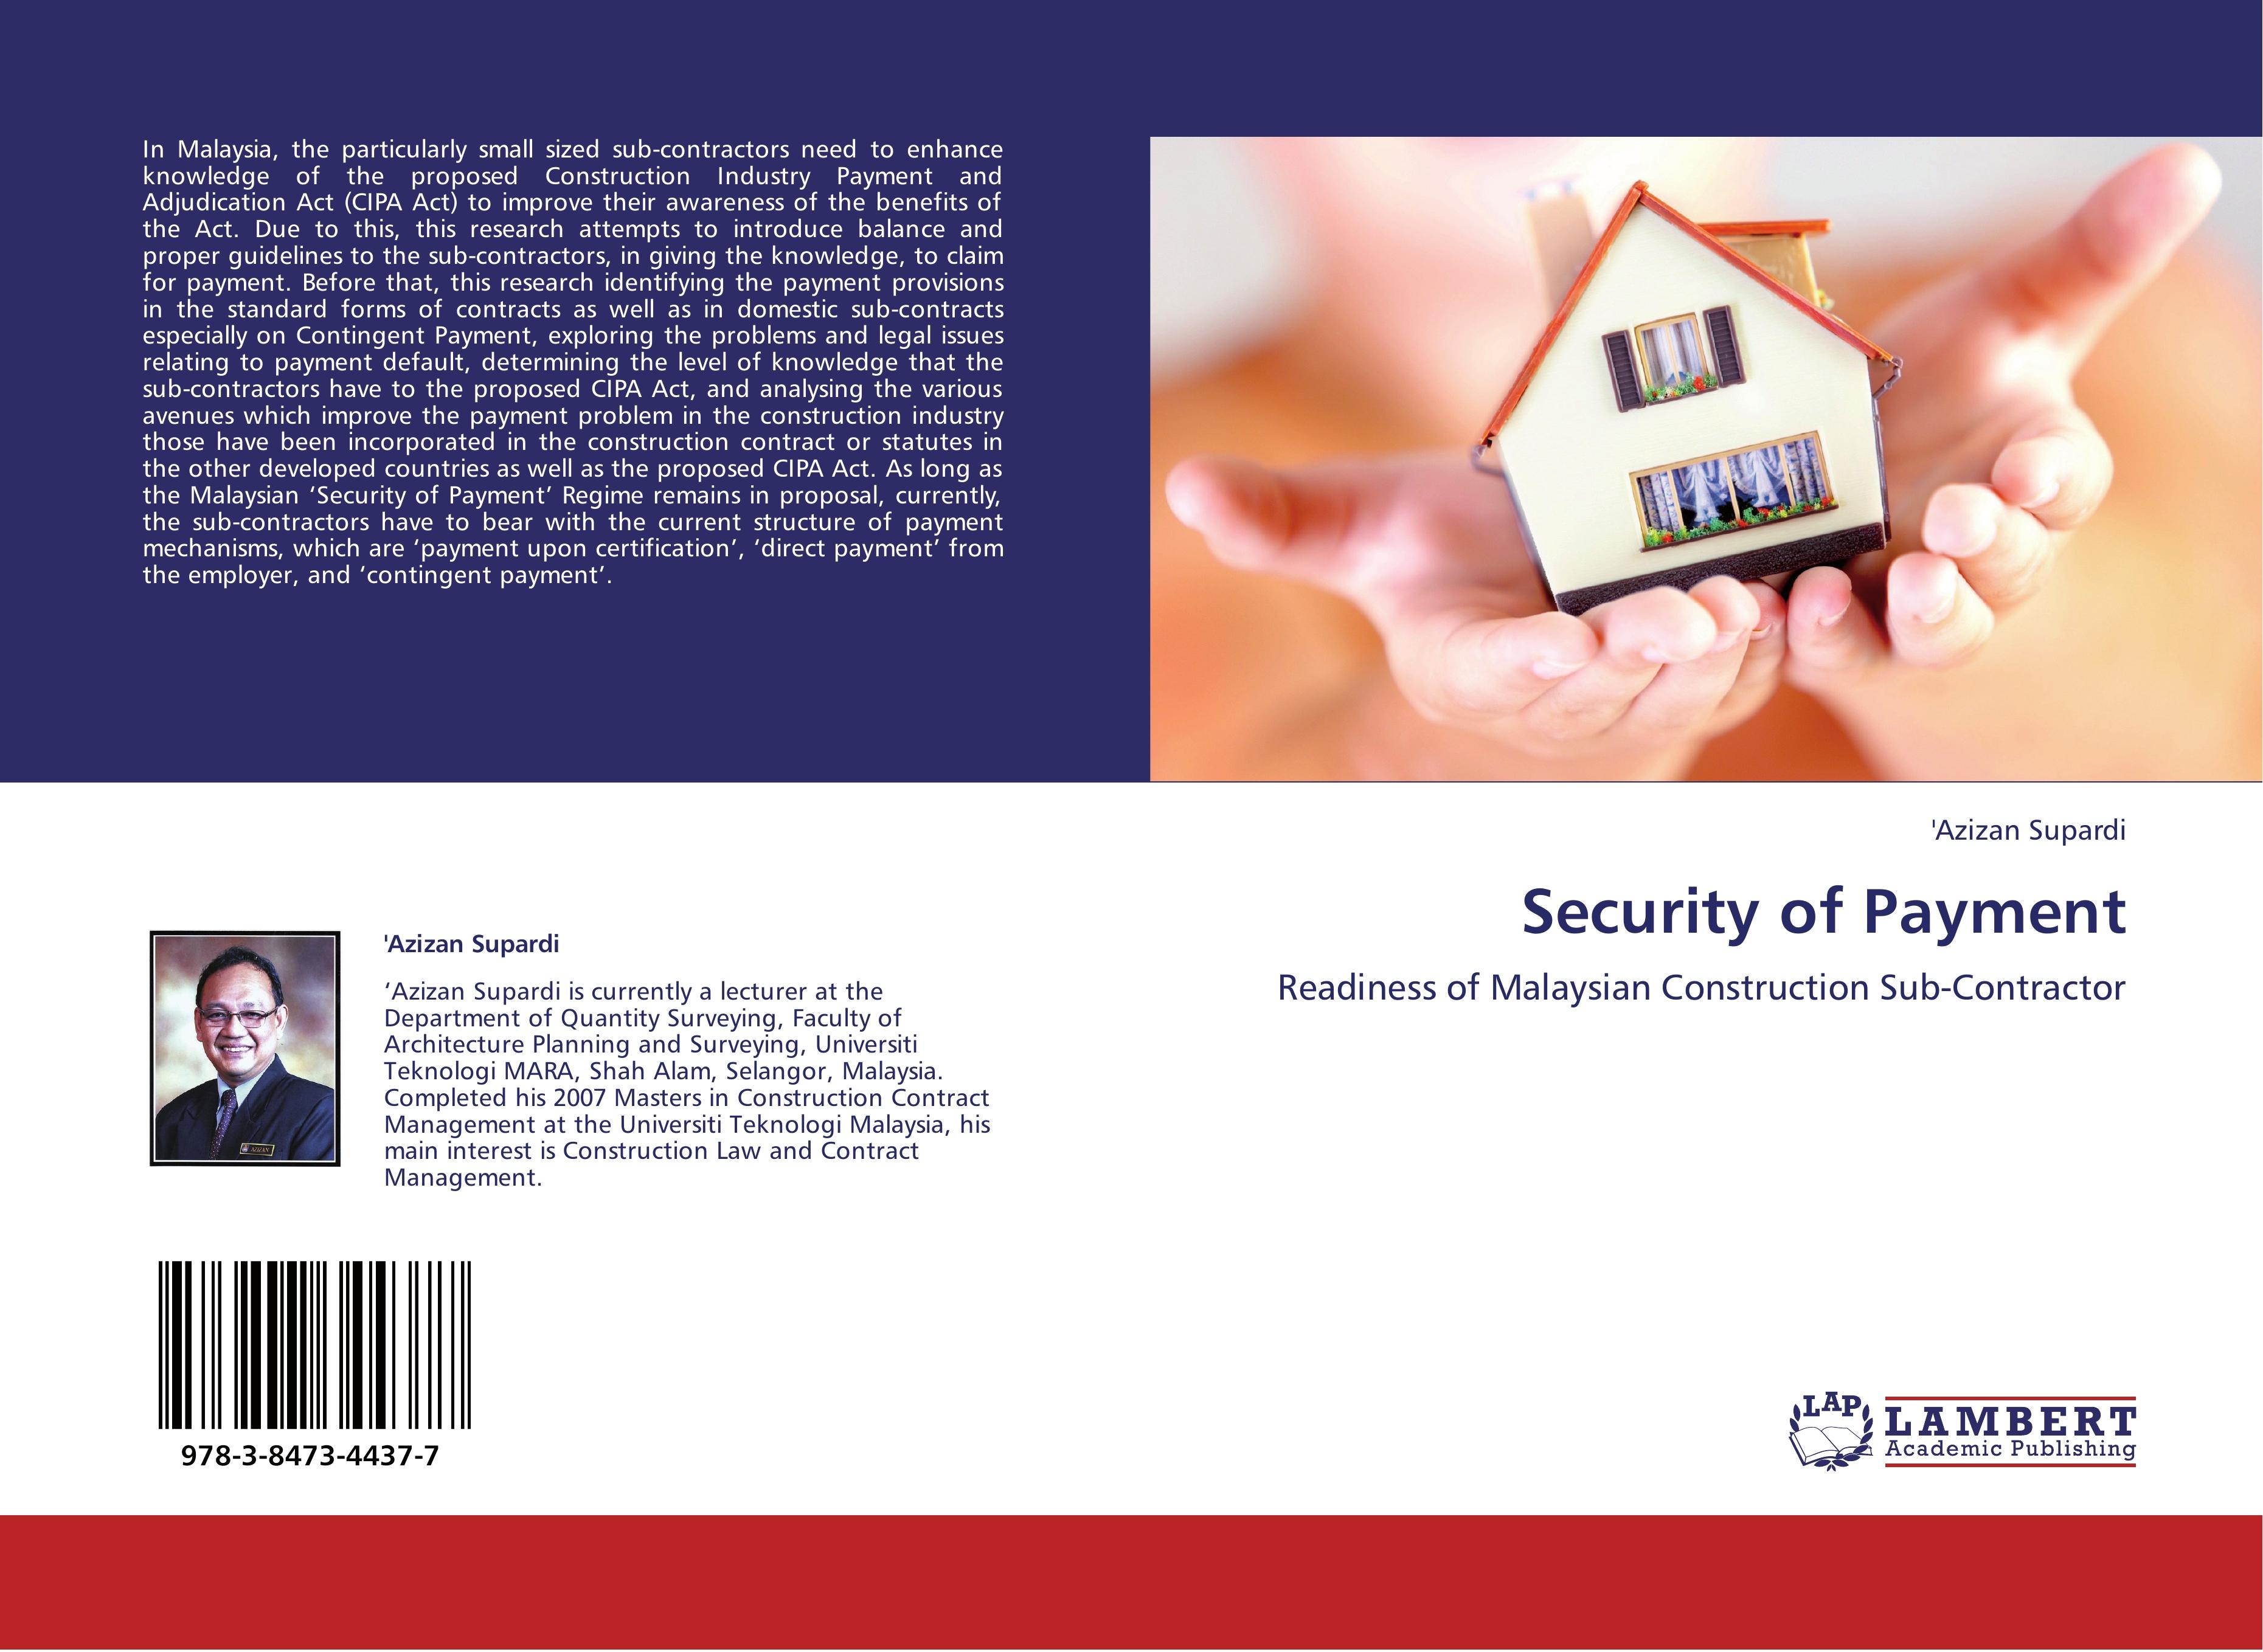 Security of Payment / Readiness of Malaysian Construction Sub-Contractor / 'Azizan Supardi / Taschenbuch / Paperback / 84 S. / Englisch / 2012 / LAP LAMBERT Academic Publishing / EAN 9783847344377 - Supardi, 'Azizan